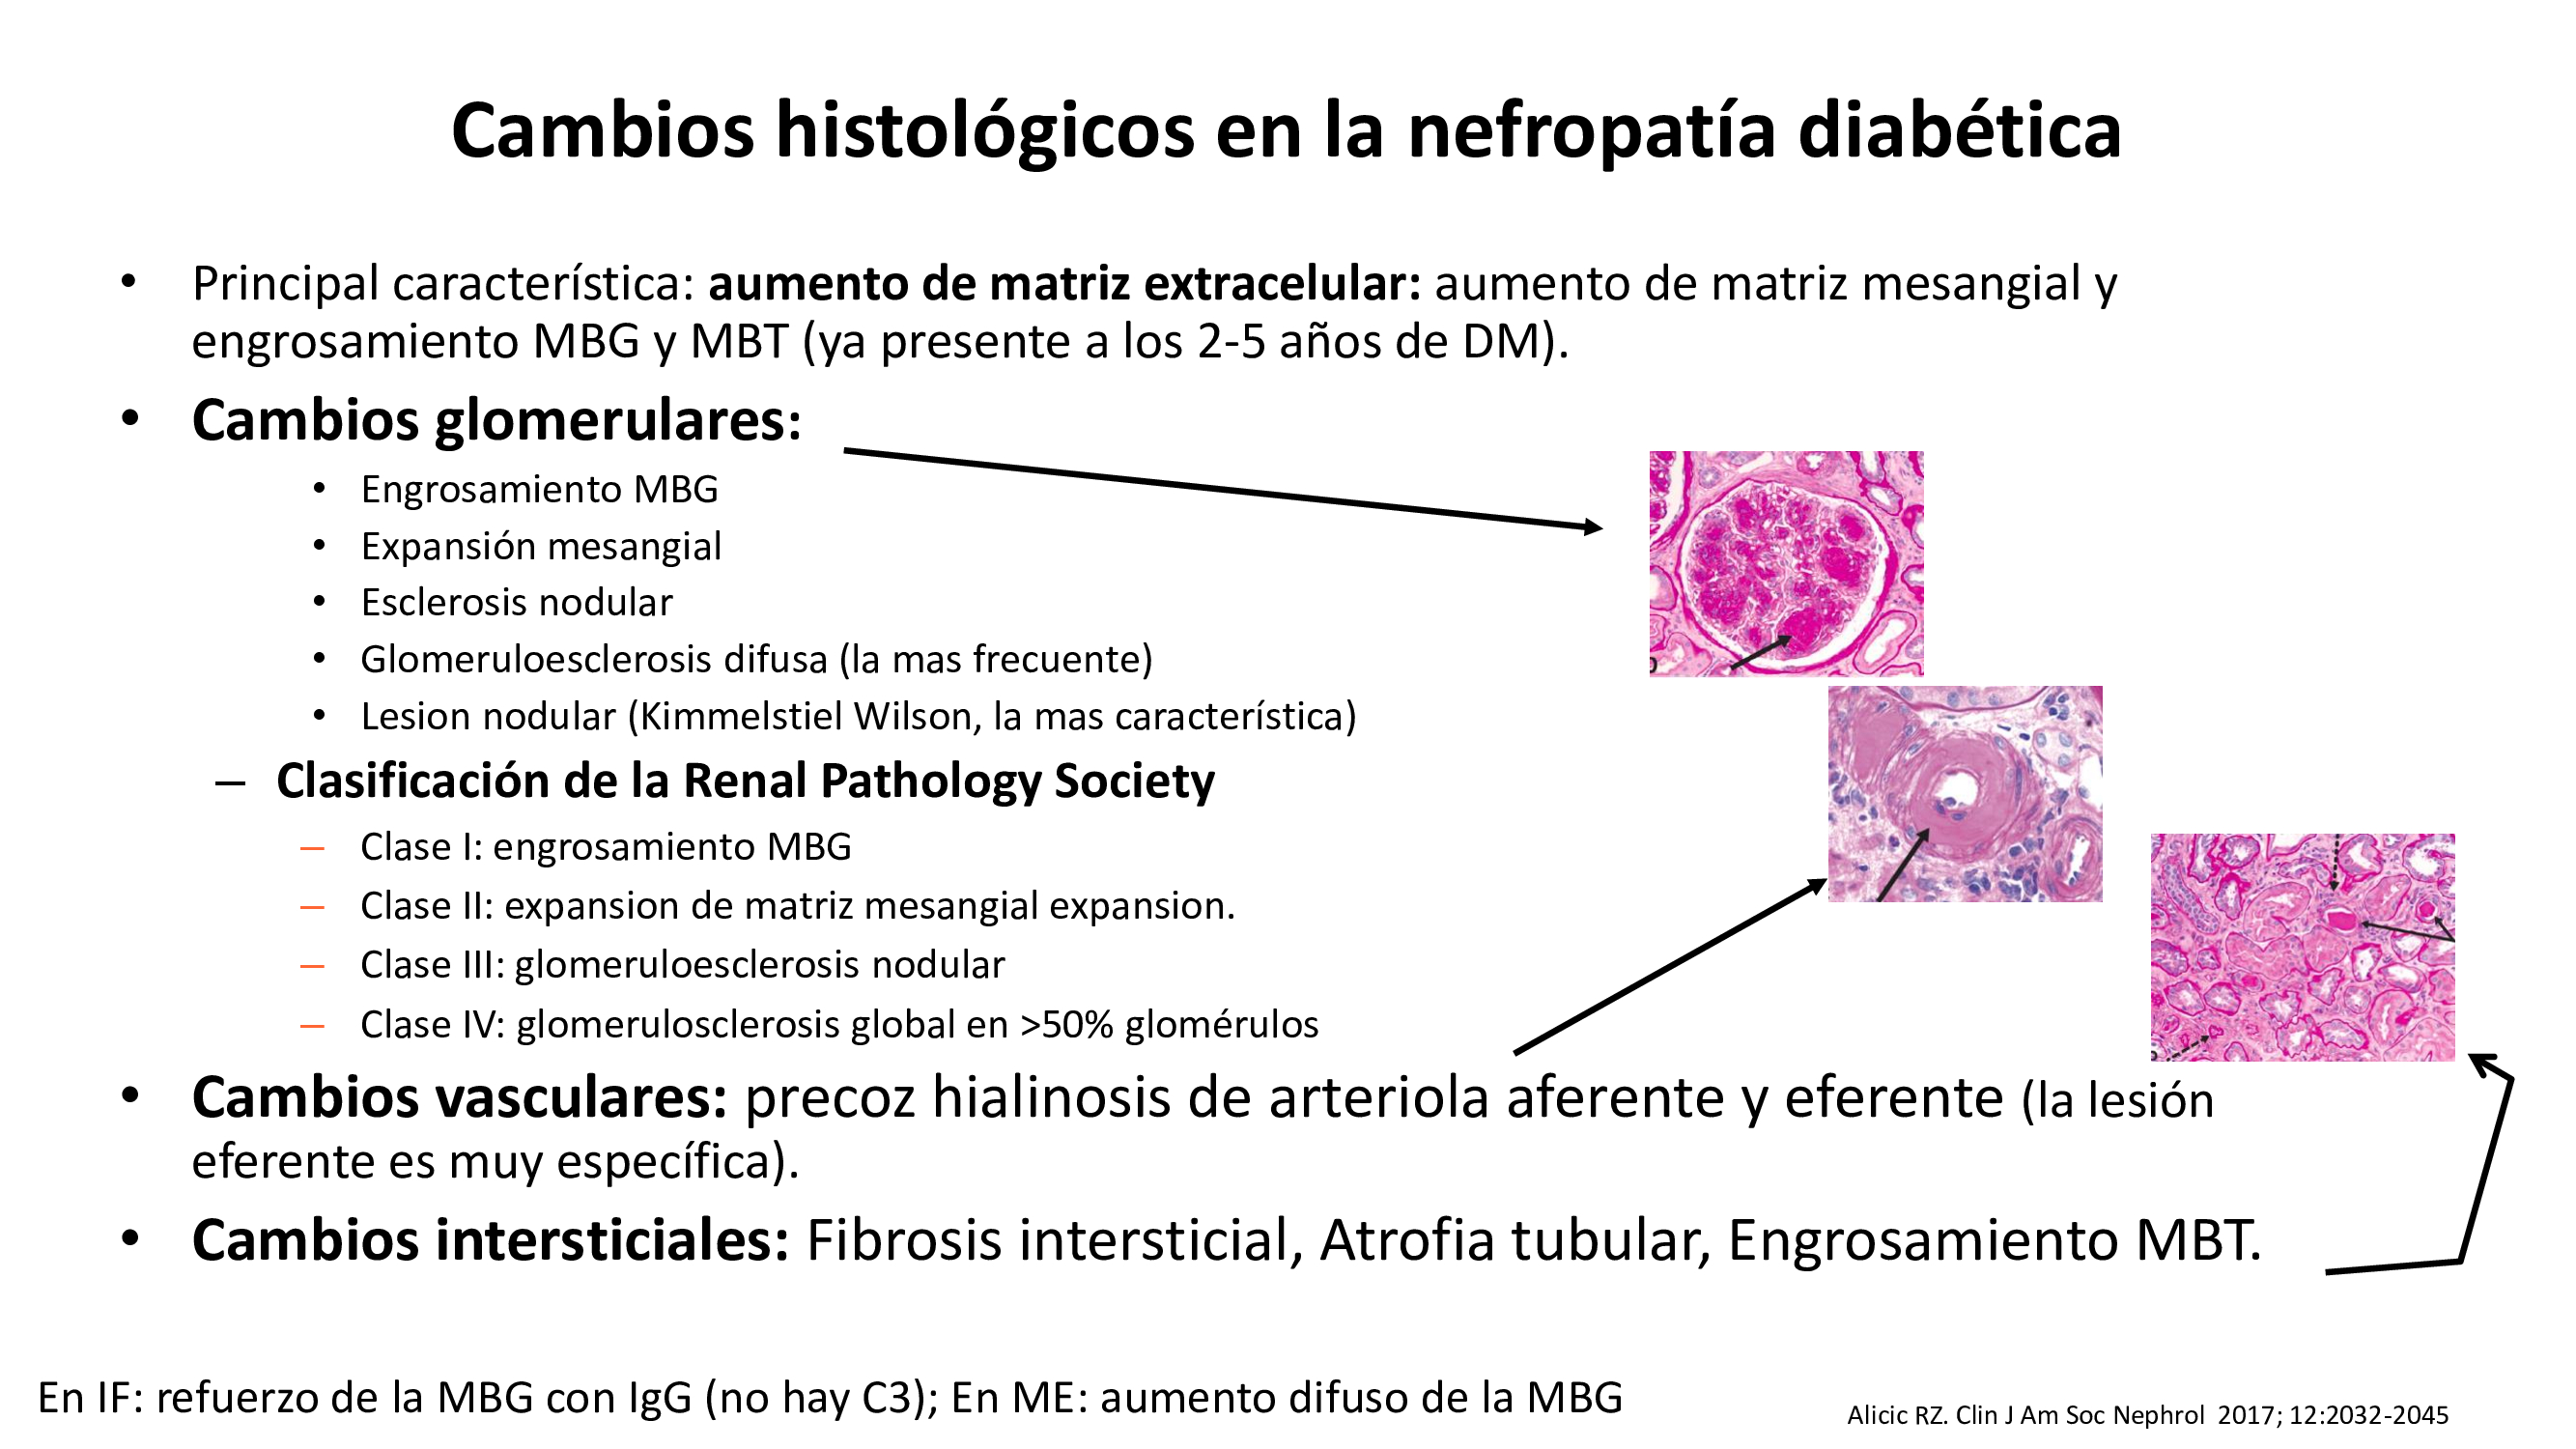 En el contexto de vías patogénicas diferentes se desarrollan las lesiones glomerulares y tubulointersticiales que dan lugar a los cambios de la nefropatía diabética.
La enfermedad renal diabética induce cambios estructurales tanto en glomérulo como en tubulos.
Cambios glomerulares:

Engrosamiento MBG
Expansión mesangial
Esclerosis nodular

Y cambios tubulointersticiales:

Fibrosis intersticial
Atrofia tubular
Engrosamiento de MBT

En el contexto de vías patogénicas diferentes se desarrollan las lesiones glomerulares y tubulointersticiales que dan lugar a los cambios de la nefropatía diabética.

IF: refuerzo de MBG con IgG (no hay C3)
ME: aumento difuso de la MBG

Different pathways and networks involved in the initiation and progression of diabetic kidney disease. AGE, advanced glycation end product; CTGF, connective tissue growth factor; JAKSTAT, Janus kinase/signal transducer and activator of transcription; PKC, protein kinase C; RAAS, renin-angiotensin-aldosterone system; ROS, reactive oxygen species; SAA, serum amyloid A; VEGF-A, vascular endothelial growth factor A. *JAK/STAT signaling can be unchanged (¿) or upregulated (¿) in early and later stages of diabetes, respectively.